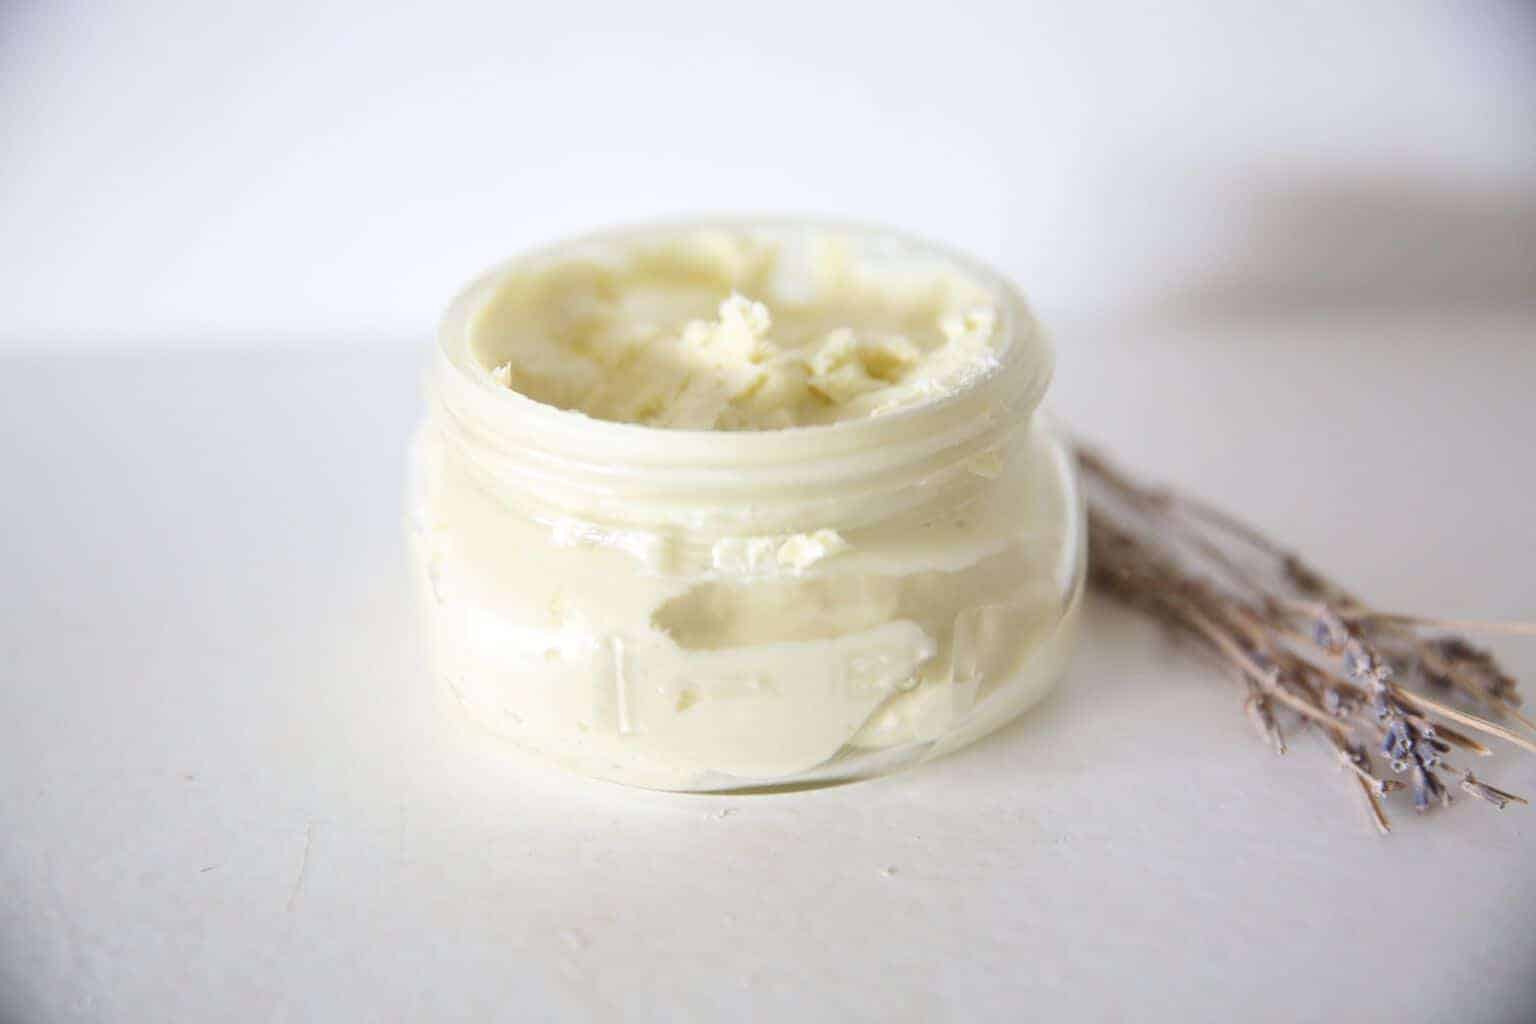 DIY whipped body butter cooling in a glass storage jar.